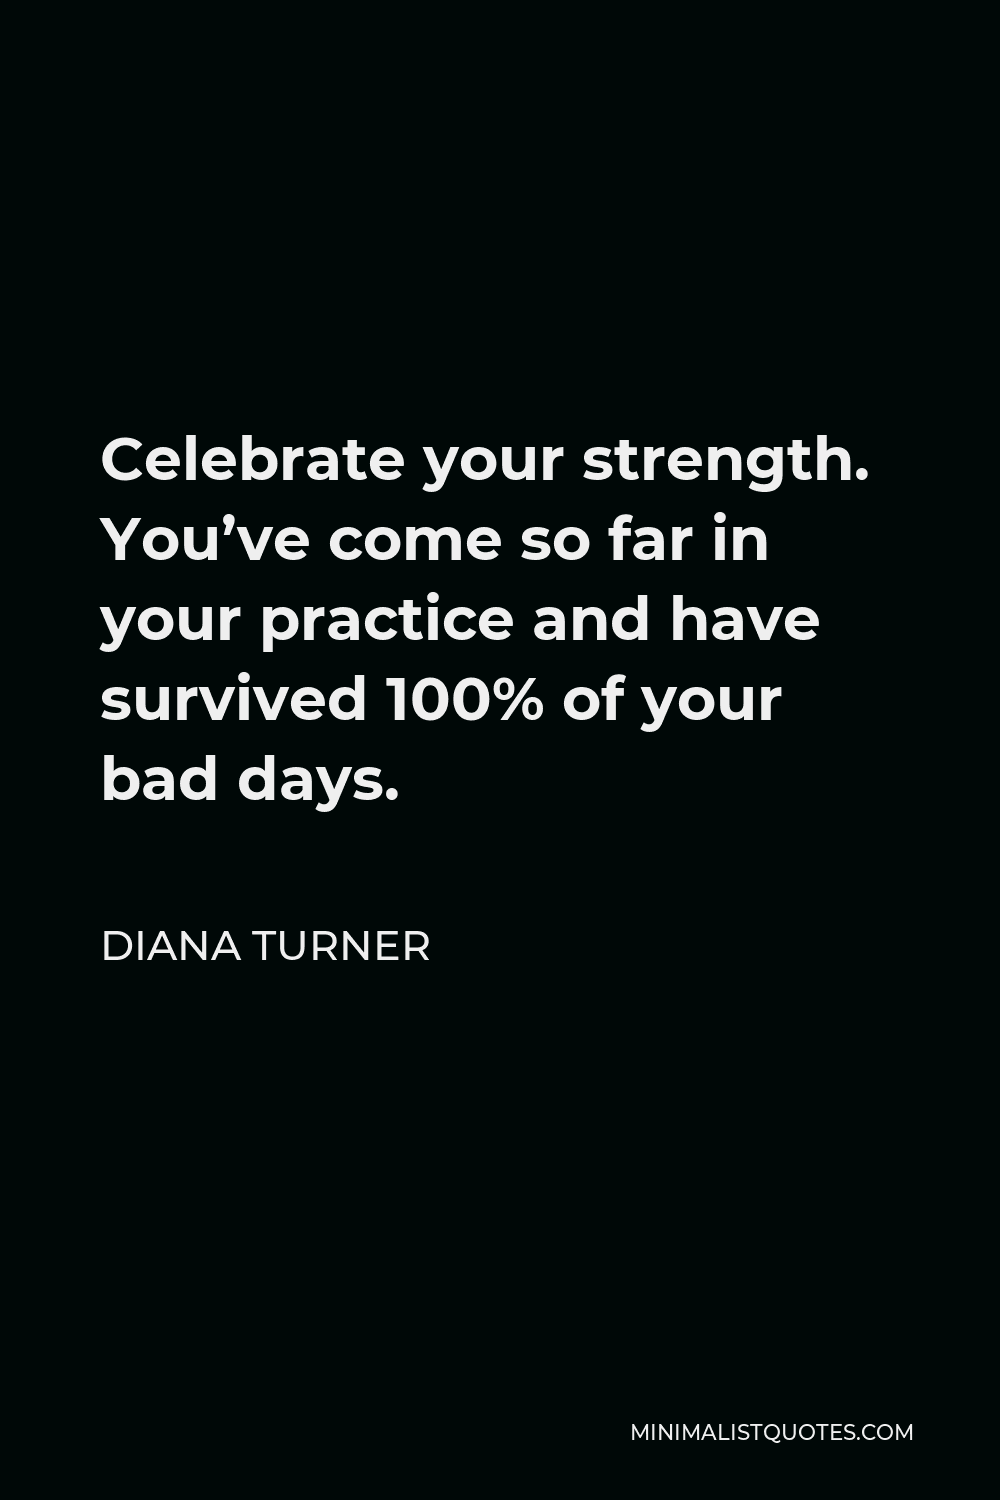 Diana Turner Quote - Celebrate your strength. You’ve come so far in your practice and have survived 100% of your bad days.